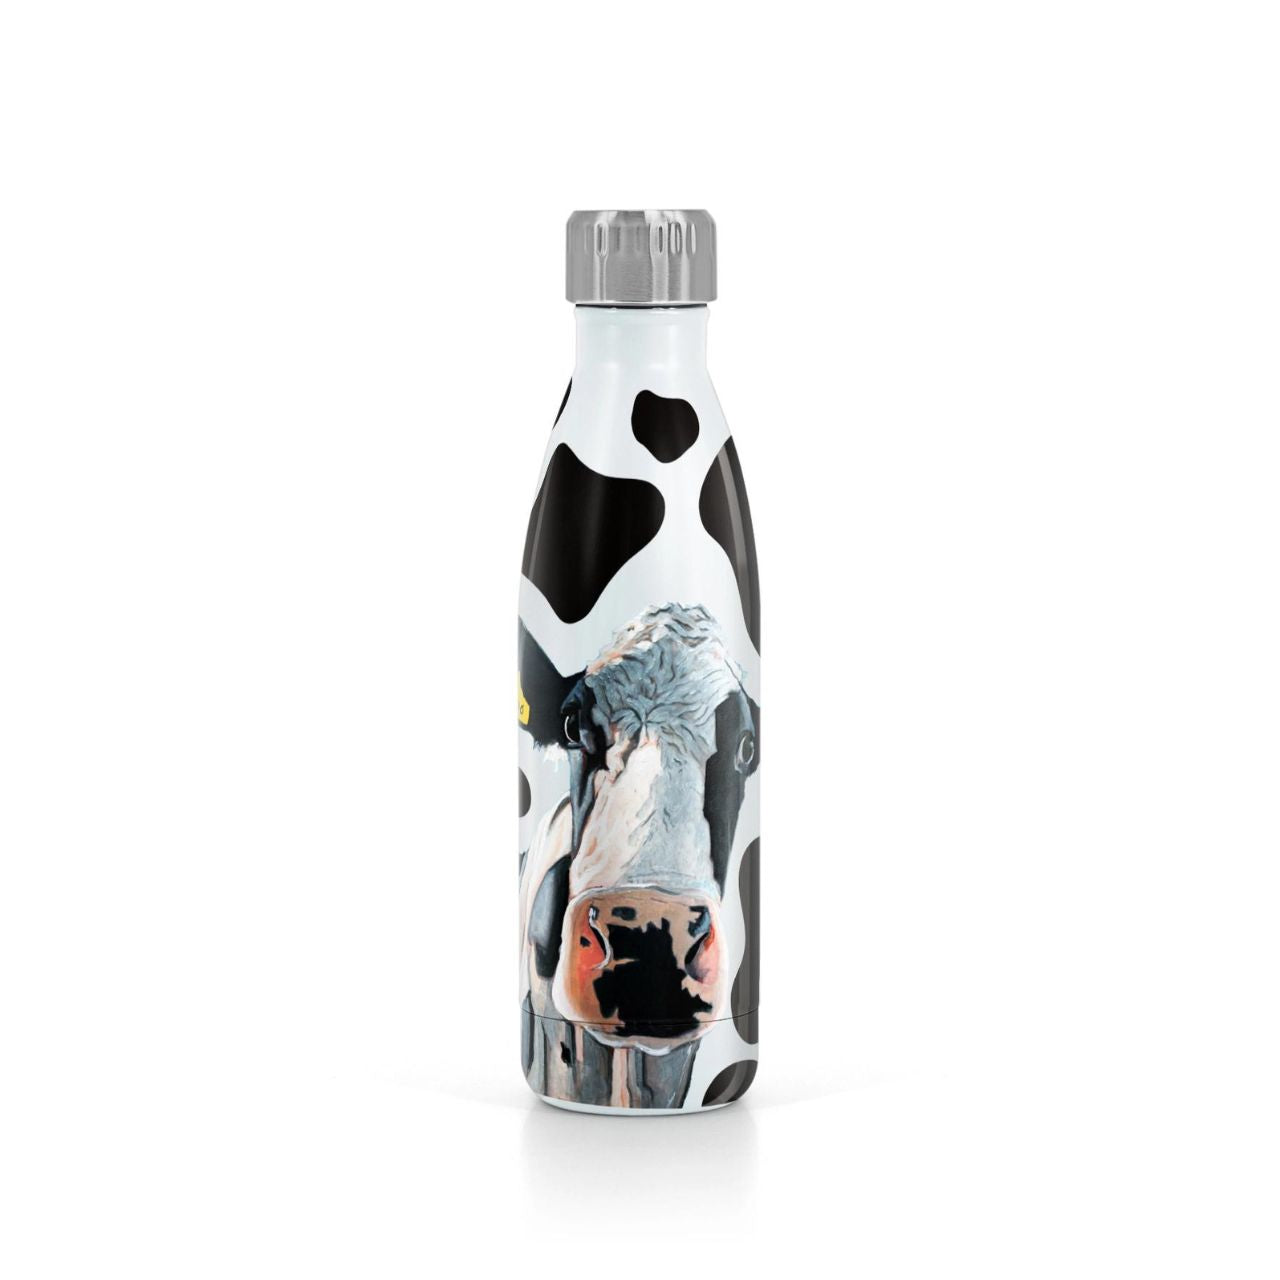 Eoin O'Connor Metal Water Bottle - Tinahely Girl NEW